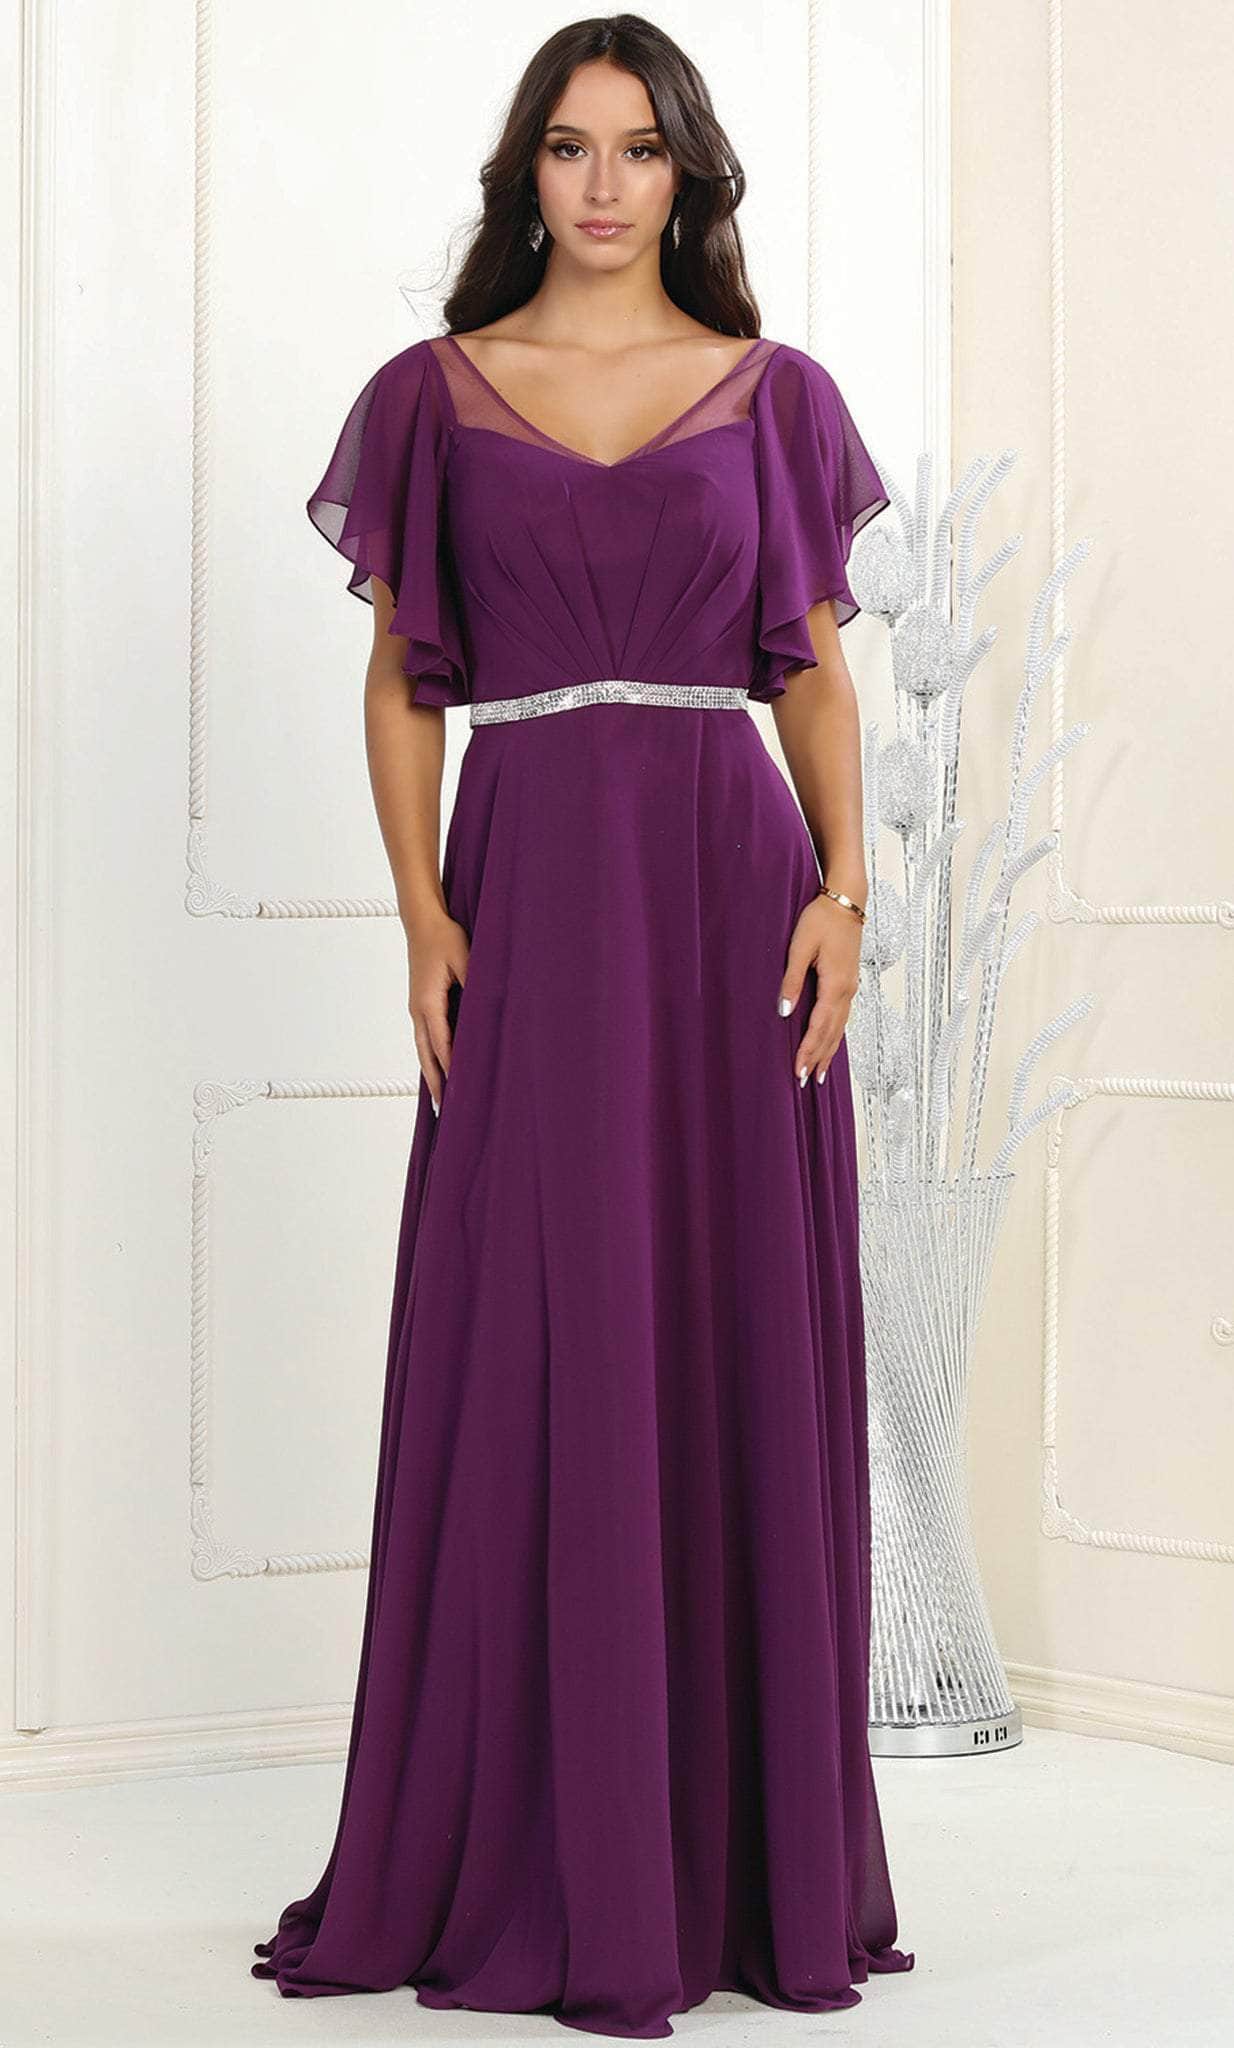 May Queen MQ1972 - Bell Sleeves V Neck A Line Dress Evening Dresses 6 / Eggplant